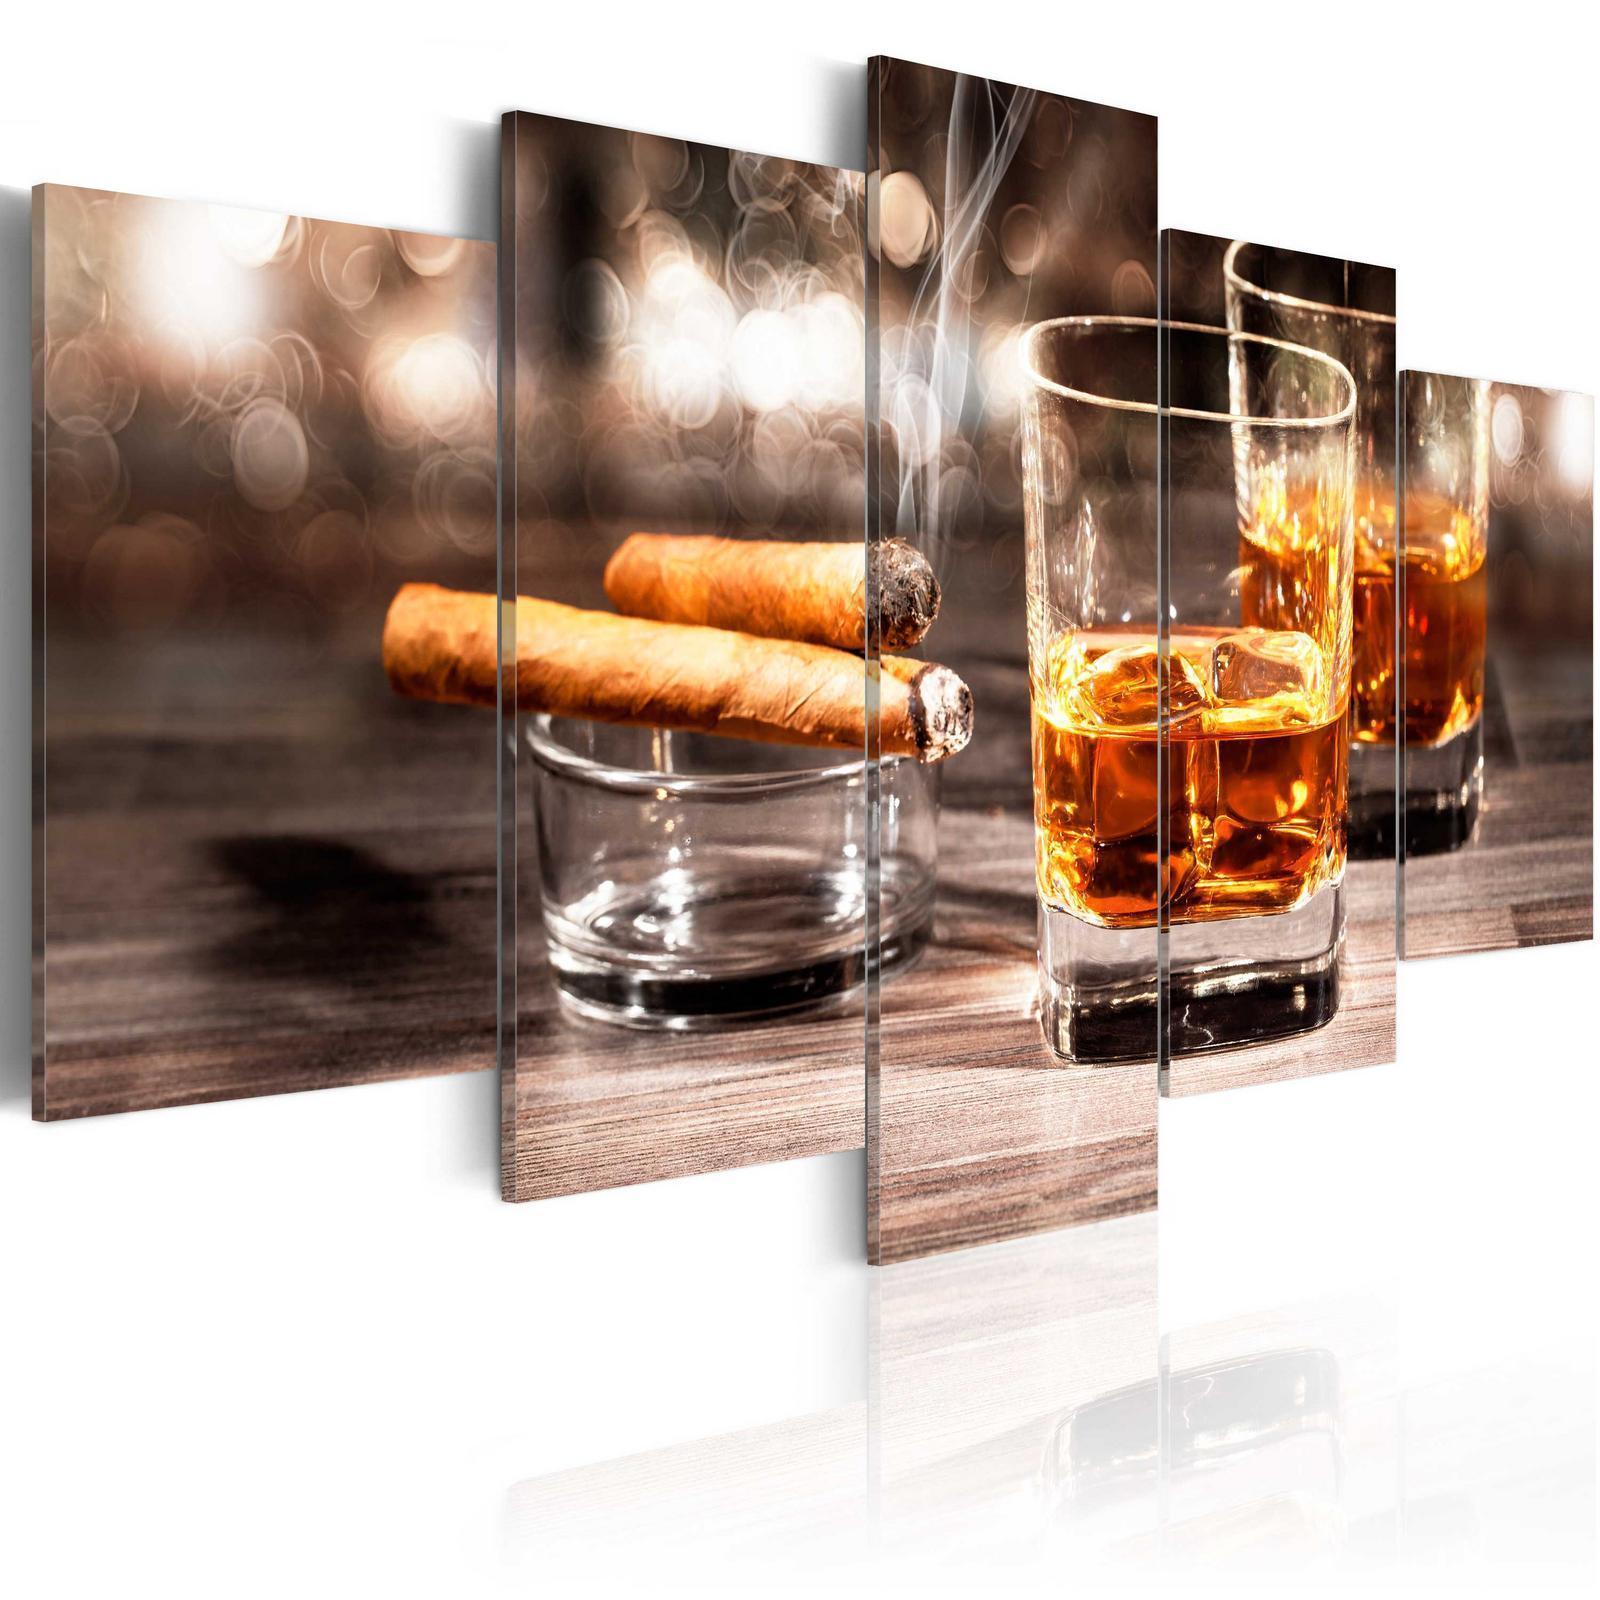 Tableau - Cigar and whiskey